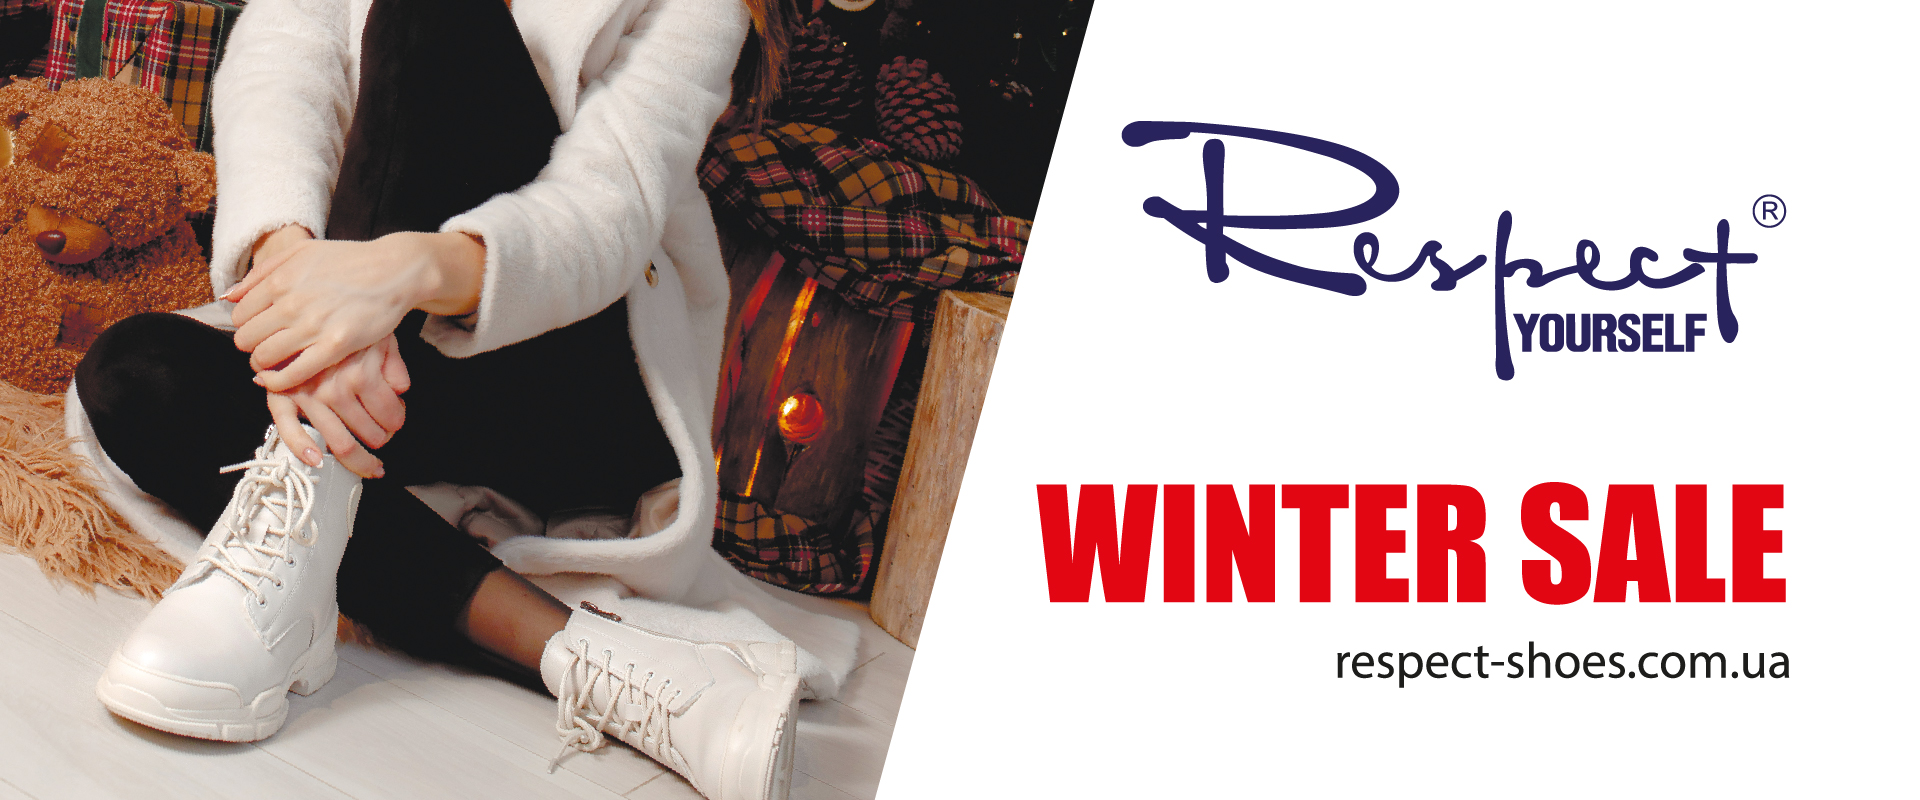 55% discount on winter shoes at Respect